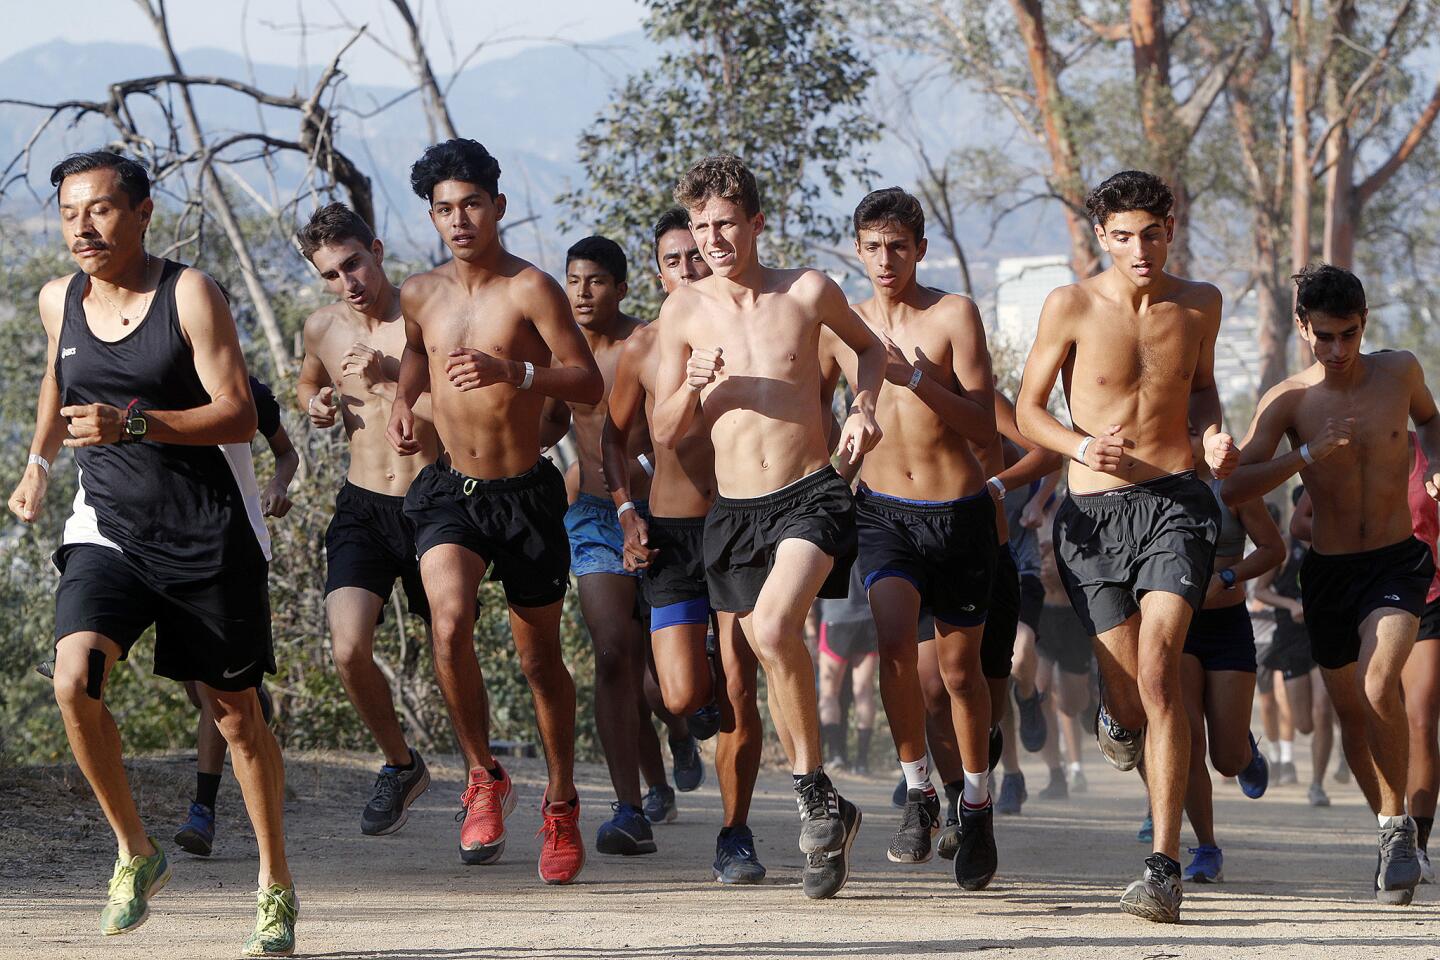 Runners climb the initial hill about a quarter mile from the starting line in a 5k trail race by Burbank High School at Griffith Park in Los Angeles on Tuesday, July 31, 2018.